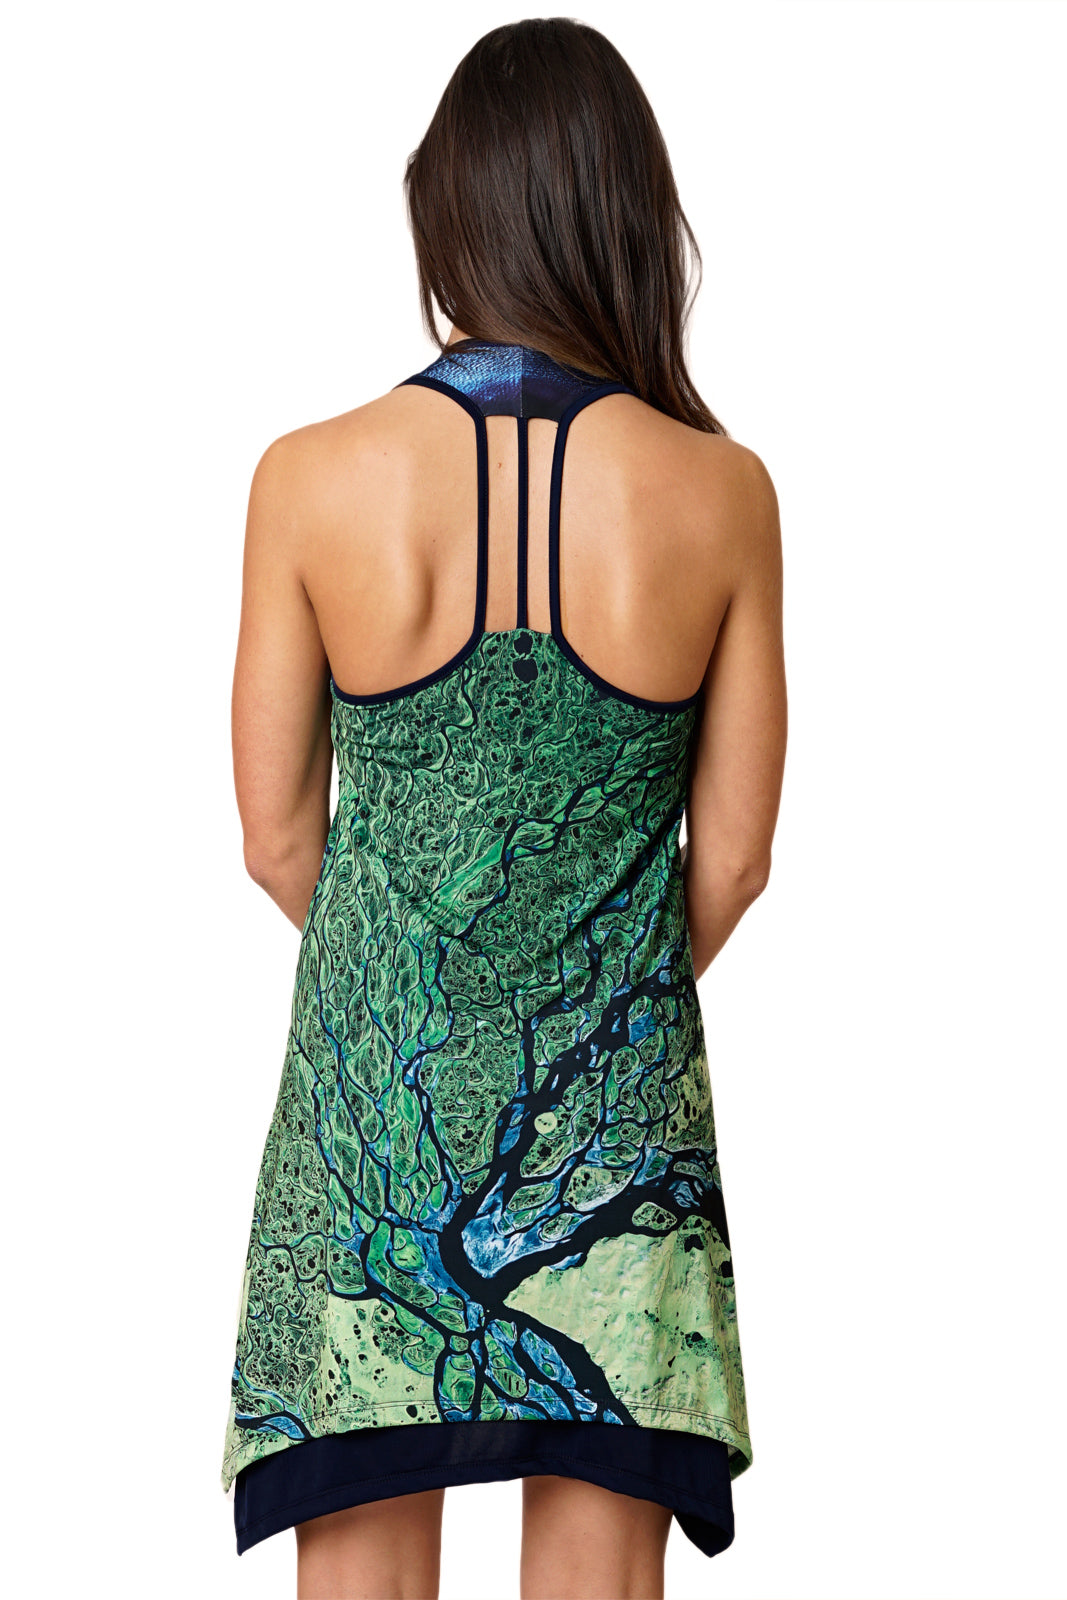 Gypsy Dress-National Geographic Clothing-Map Dress-Nature Clothing